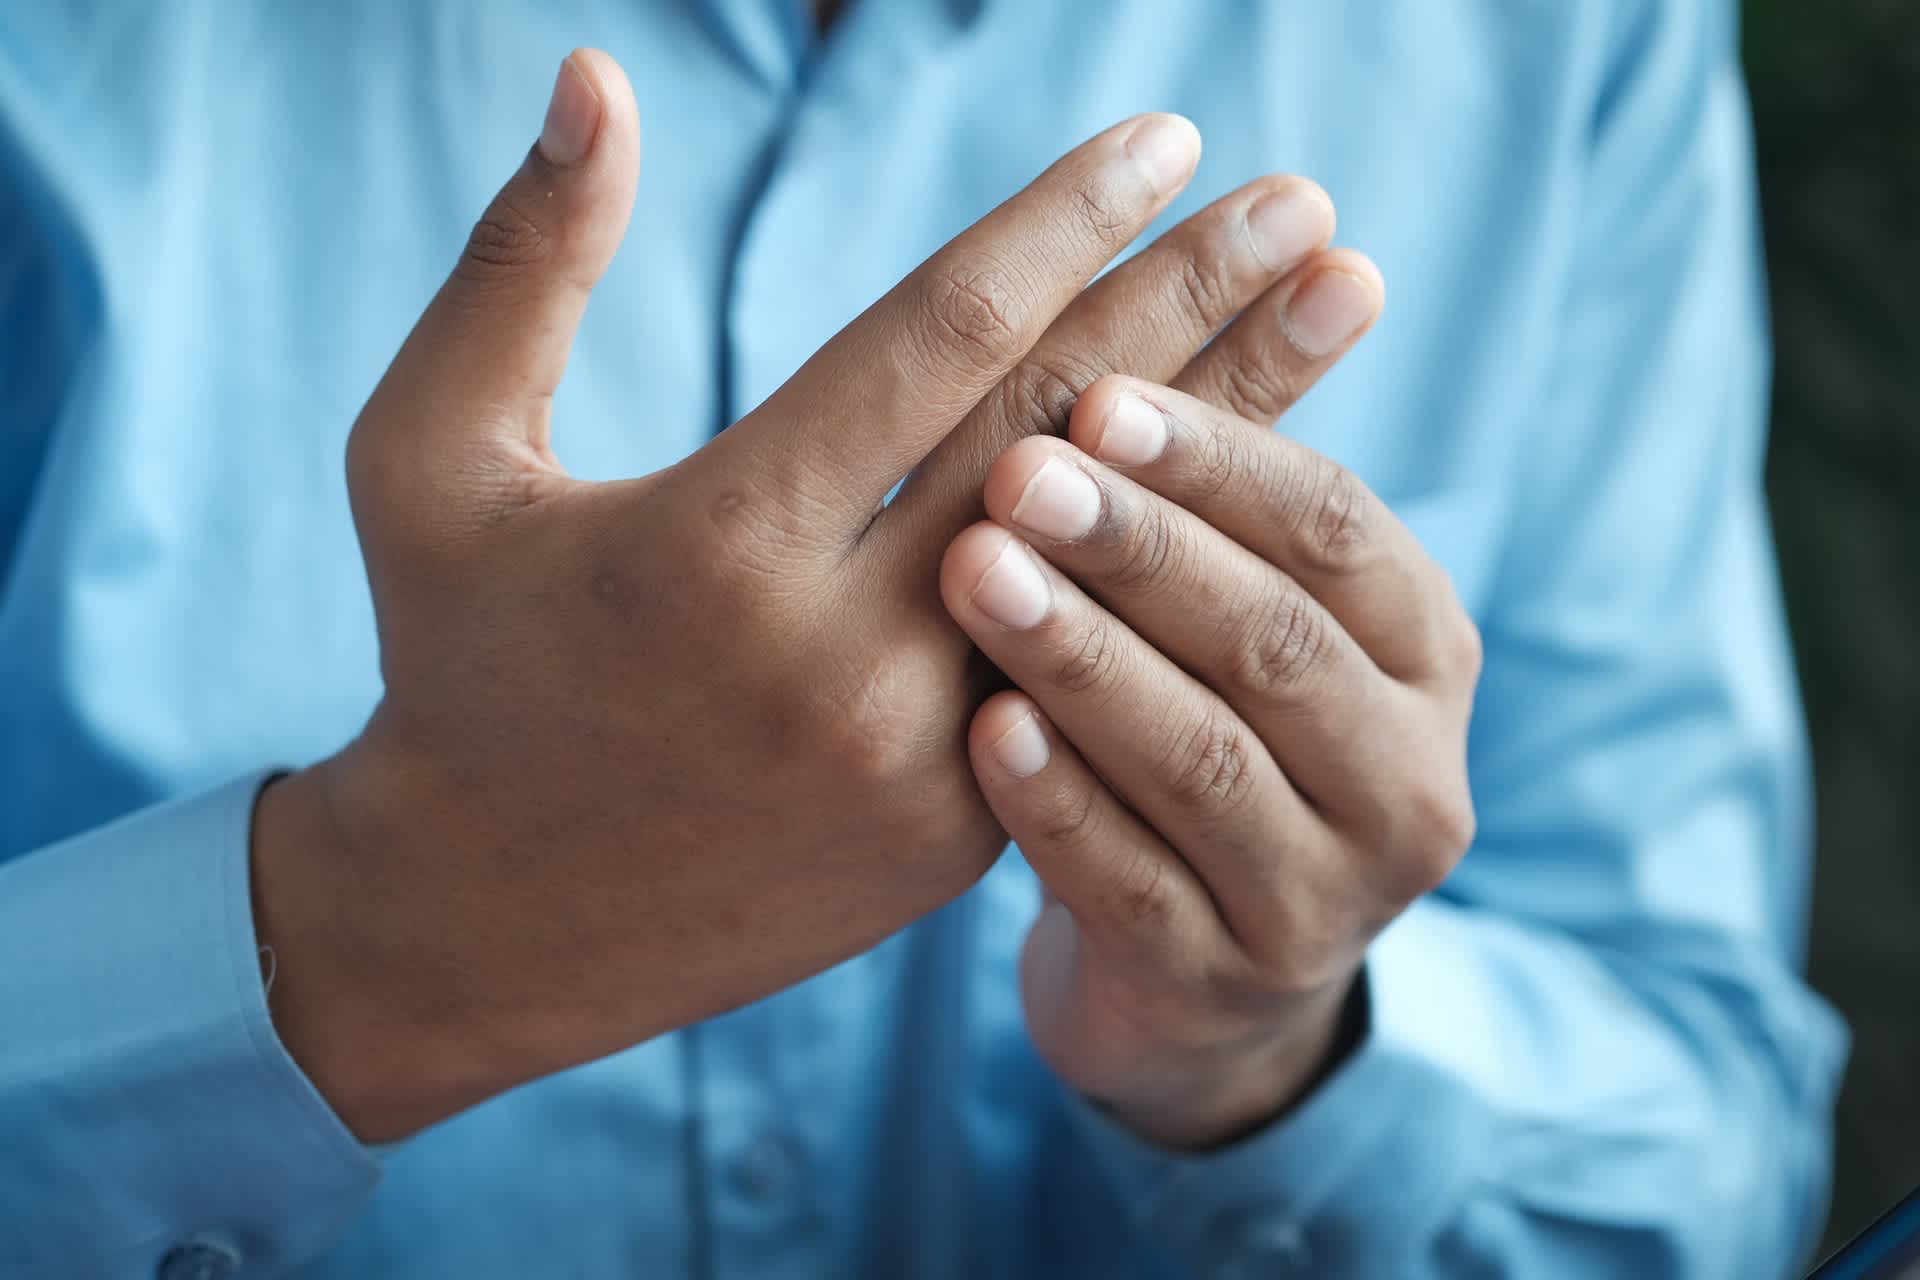 Person with arthritis holding painful hands